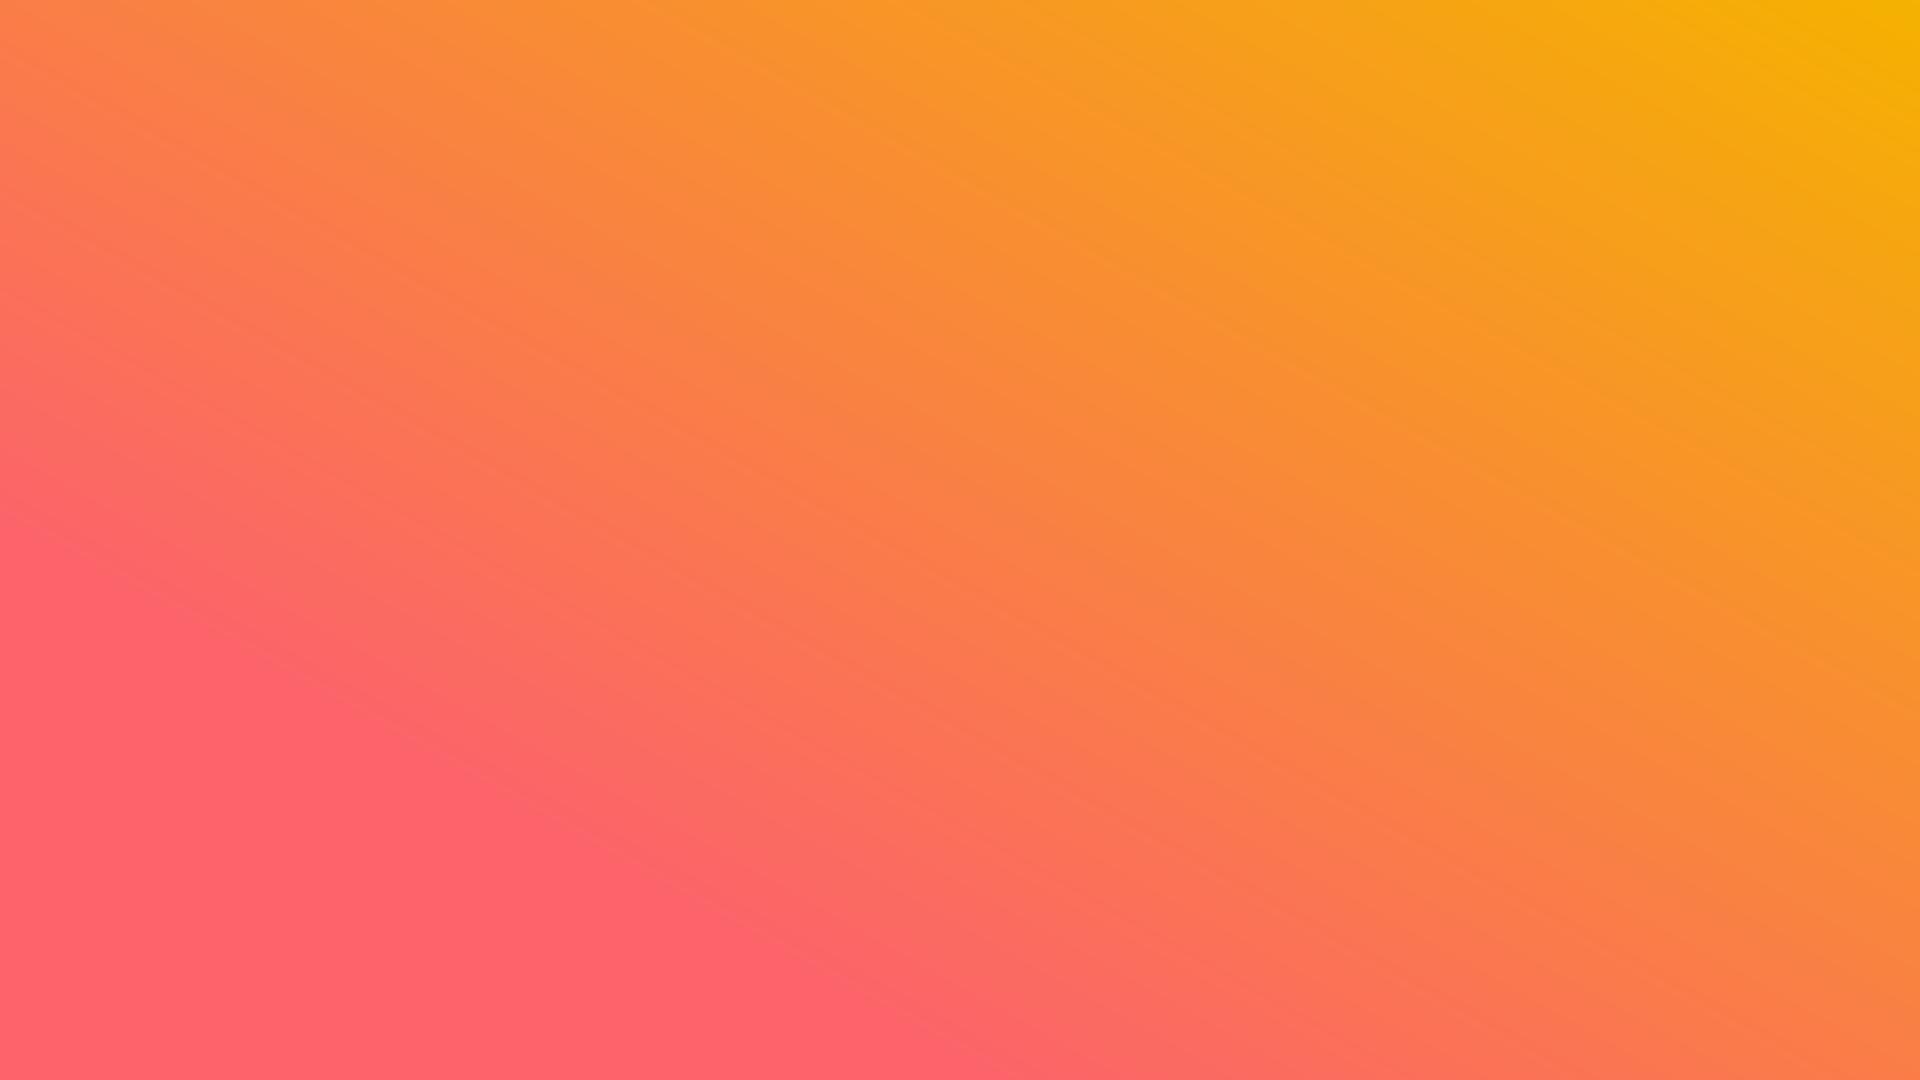   background  image linear gradient 